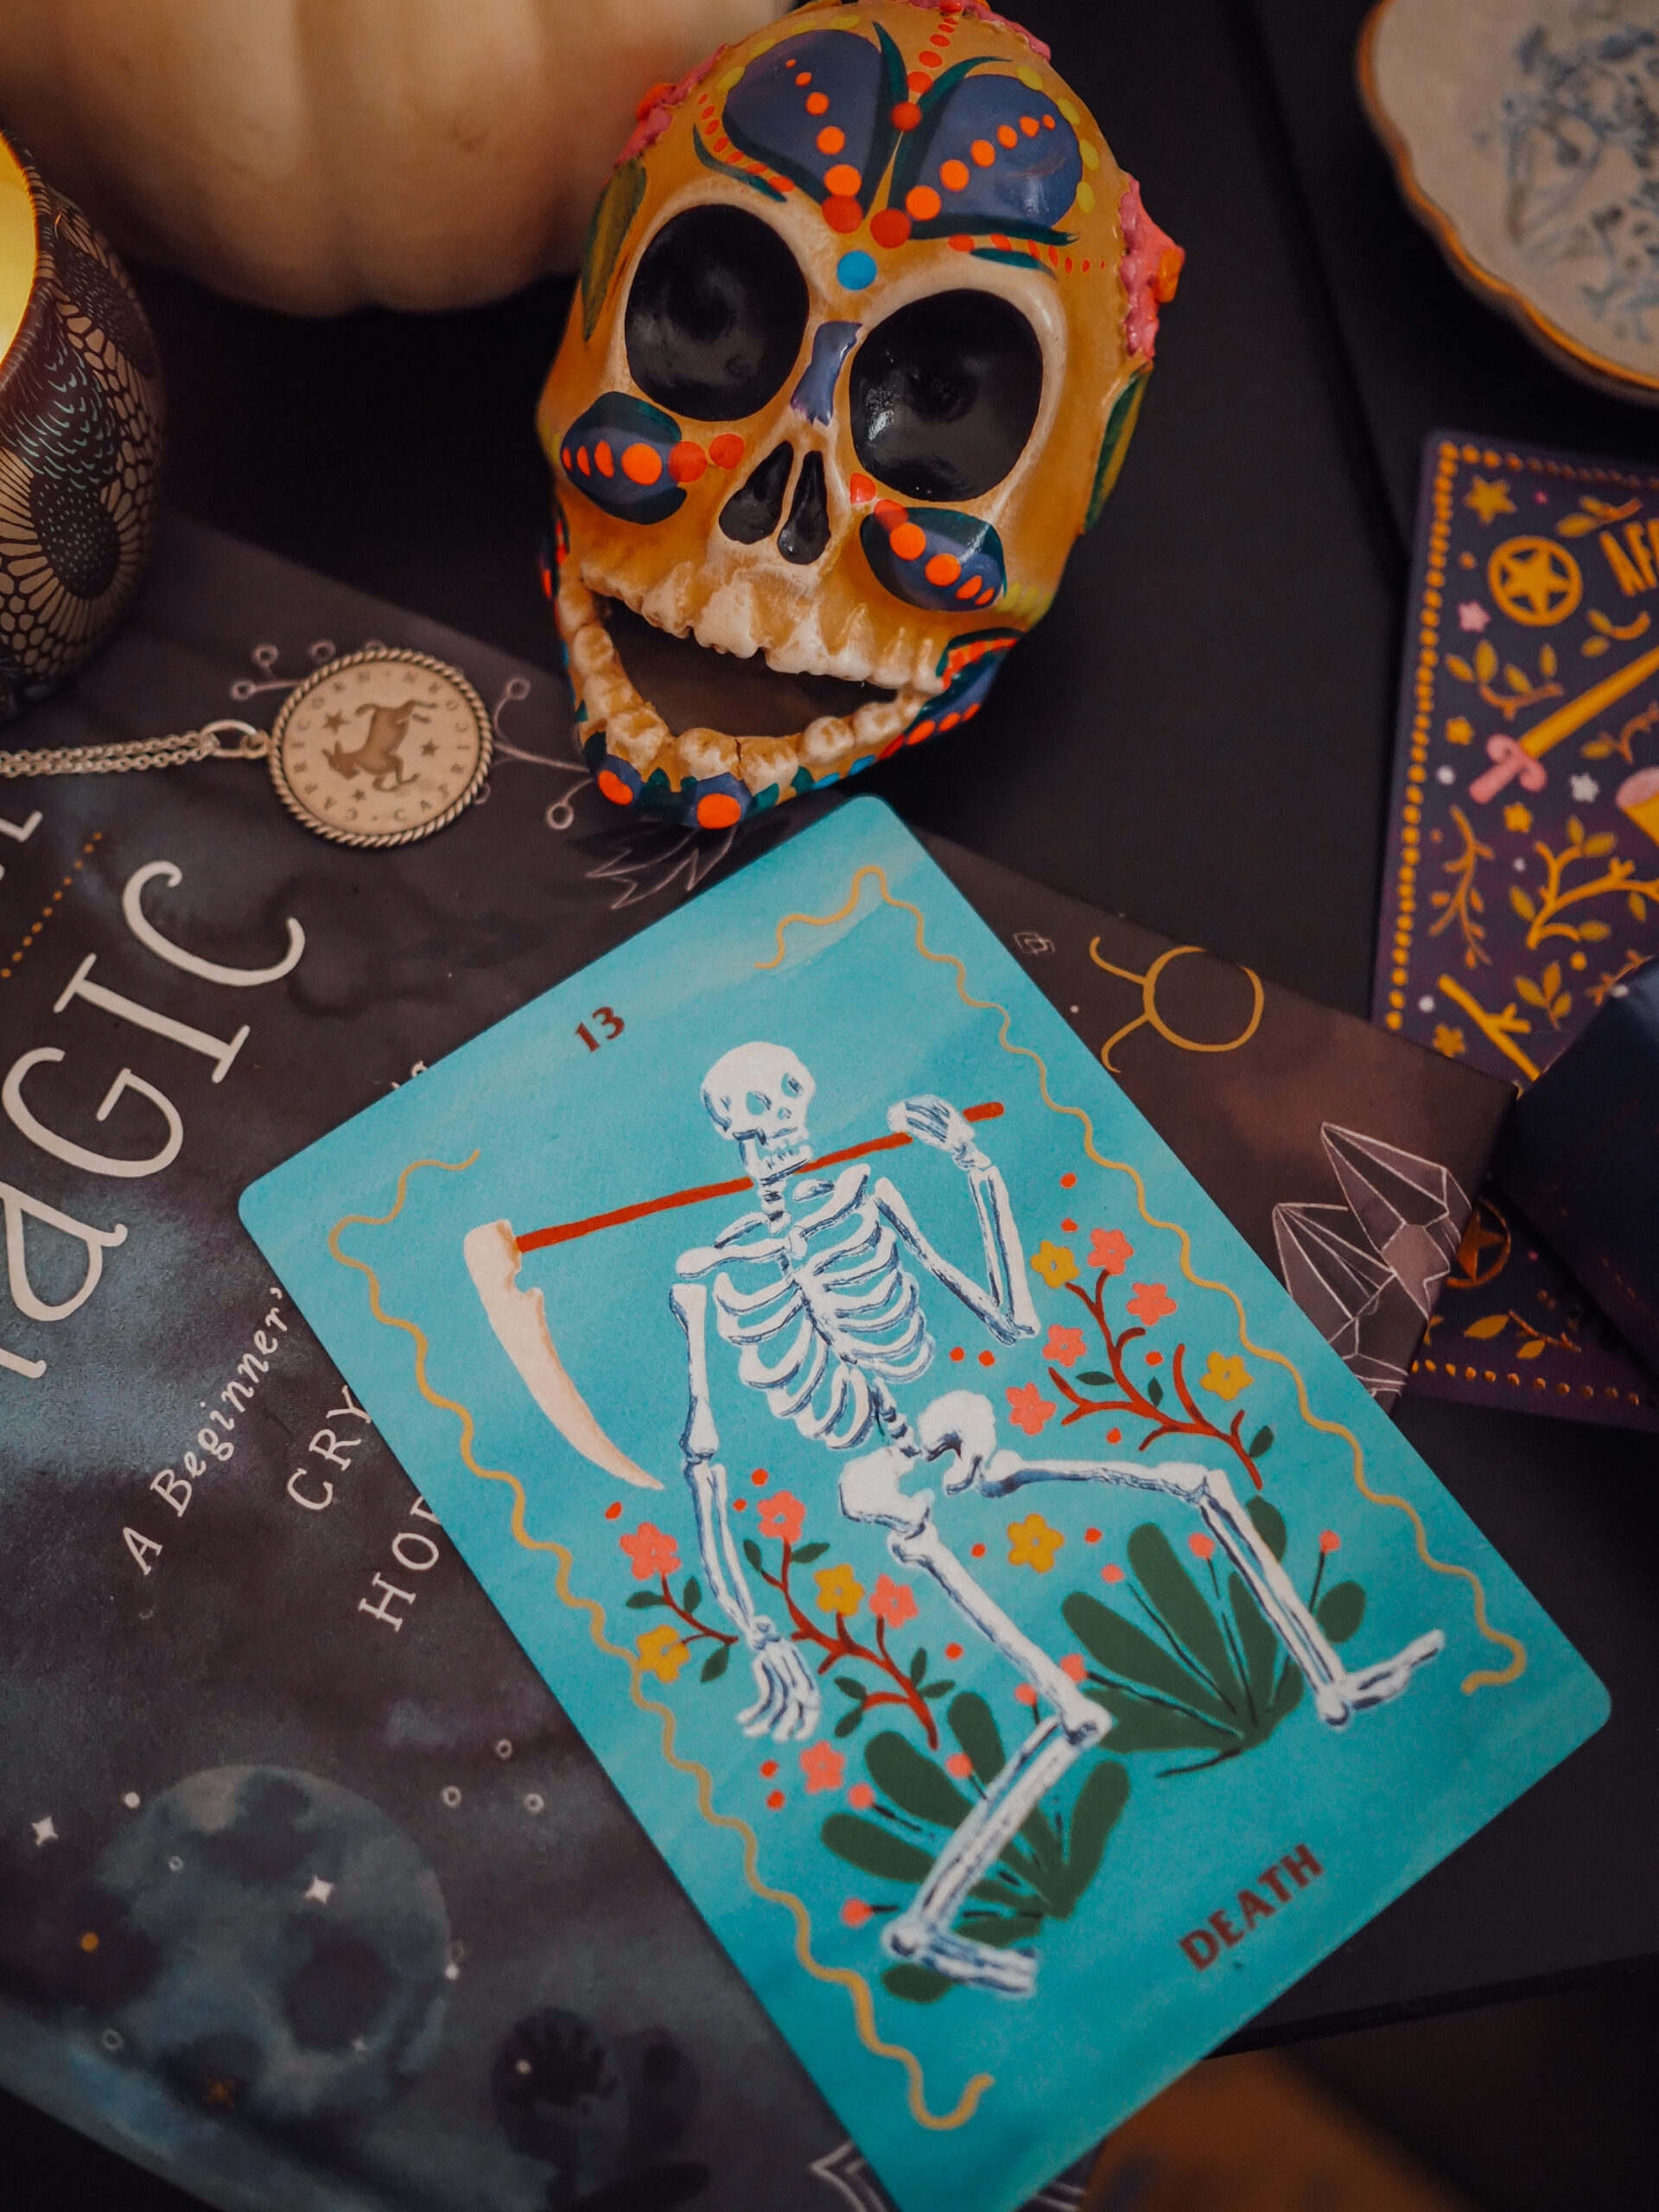 Celebrating Samhain this year? Check out these Samhain blessing and ritual ideas to celebrate this spooky season Pagan holiday.